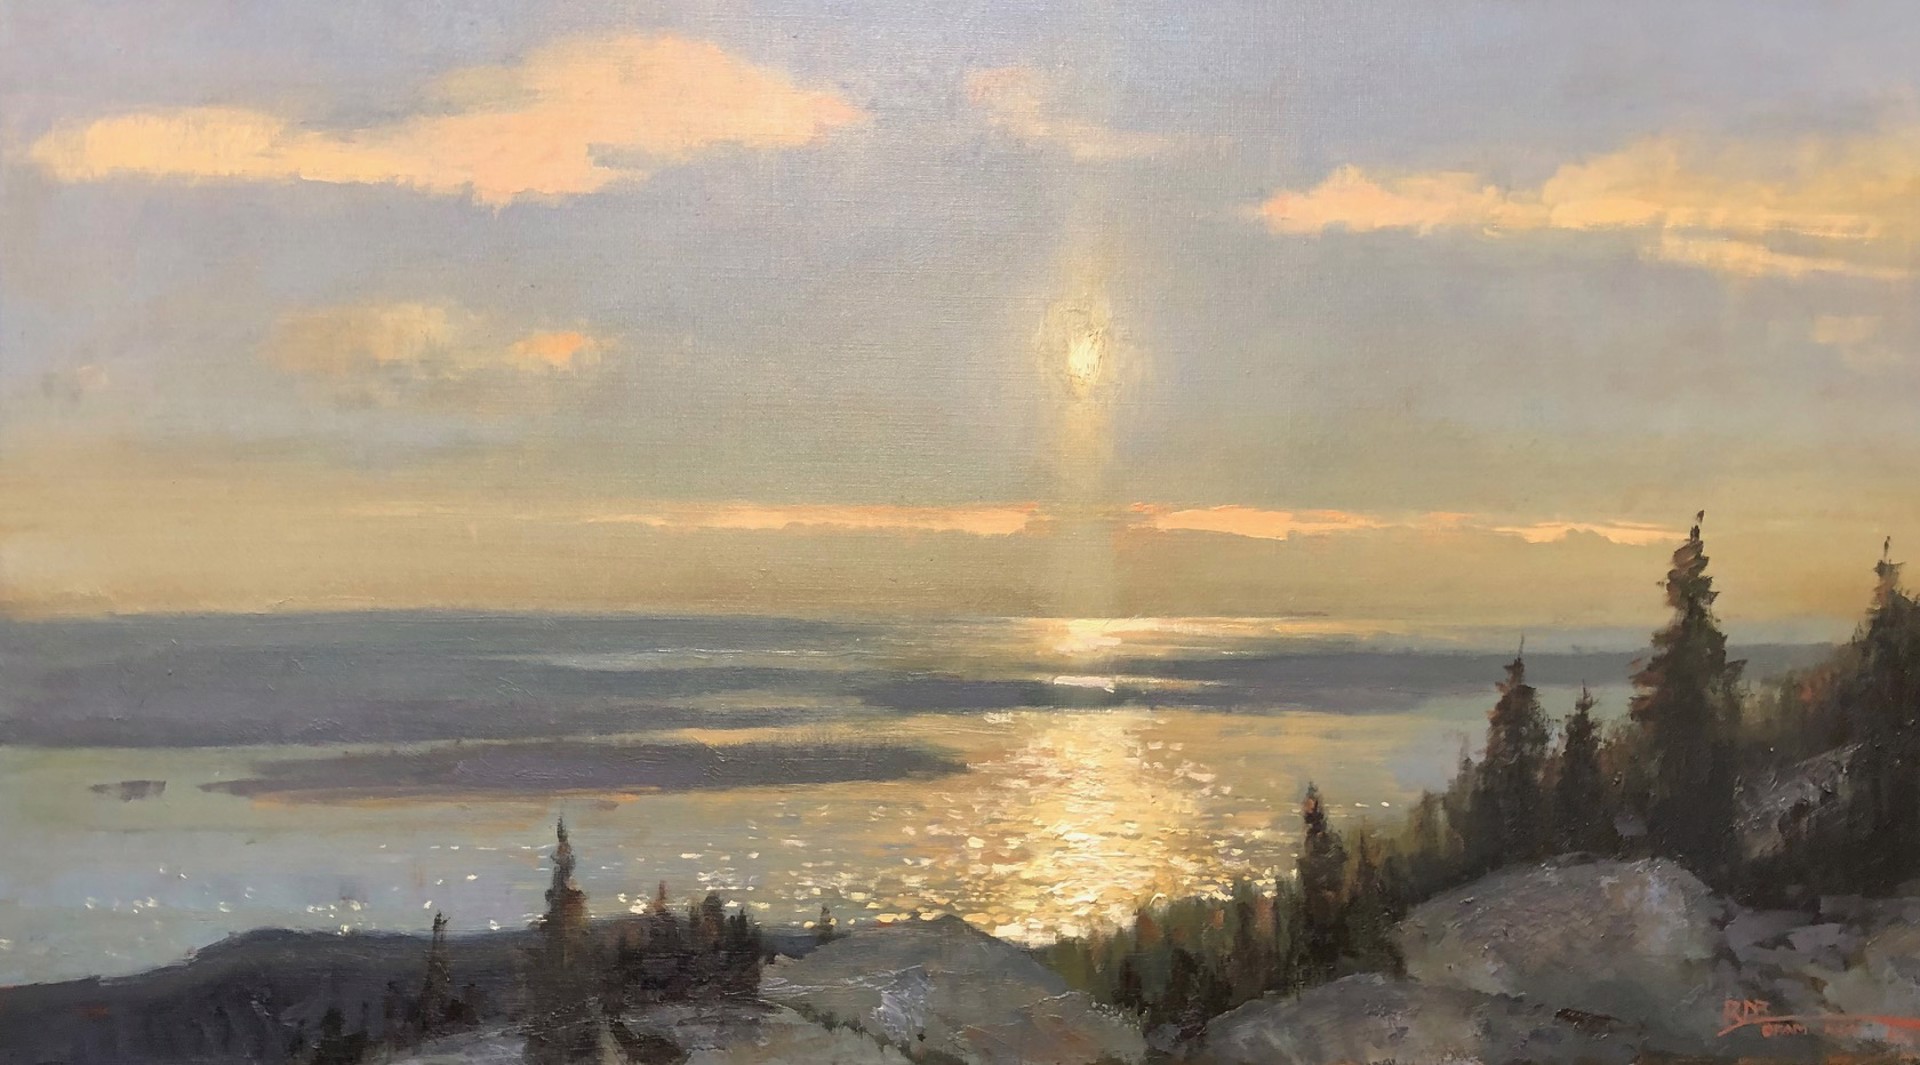 Sunset at Cadillac Mountain by Roger Dale Brown, OPAM, AISM, ASMA, ARCLM